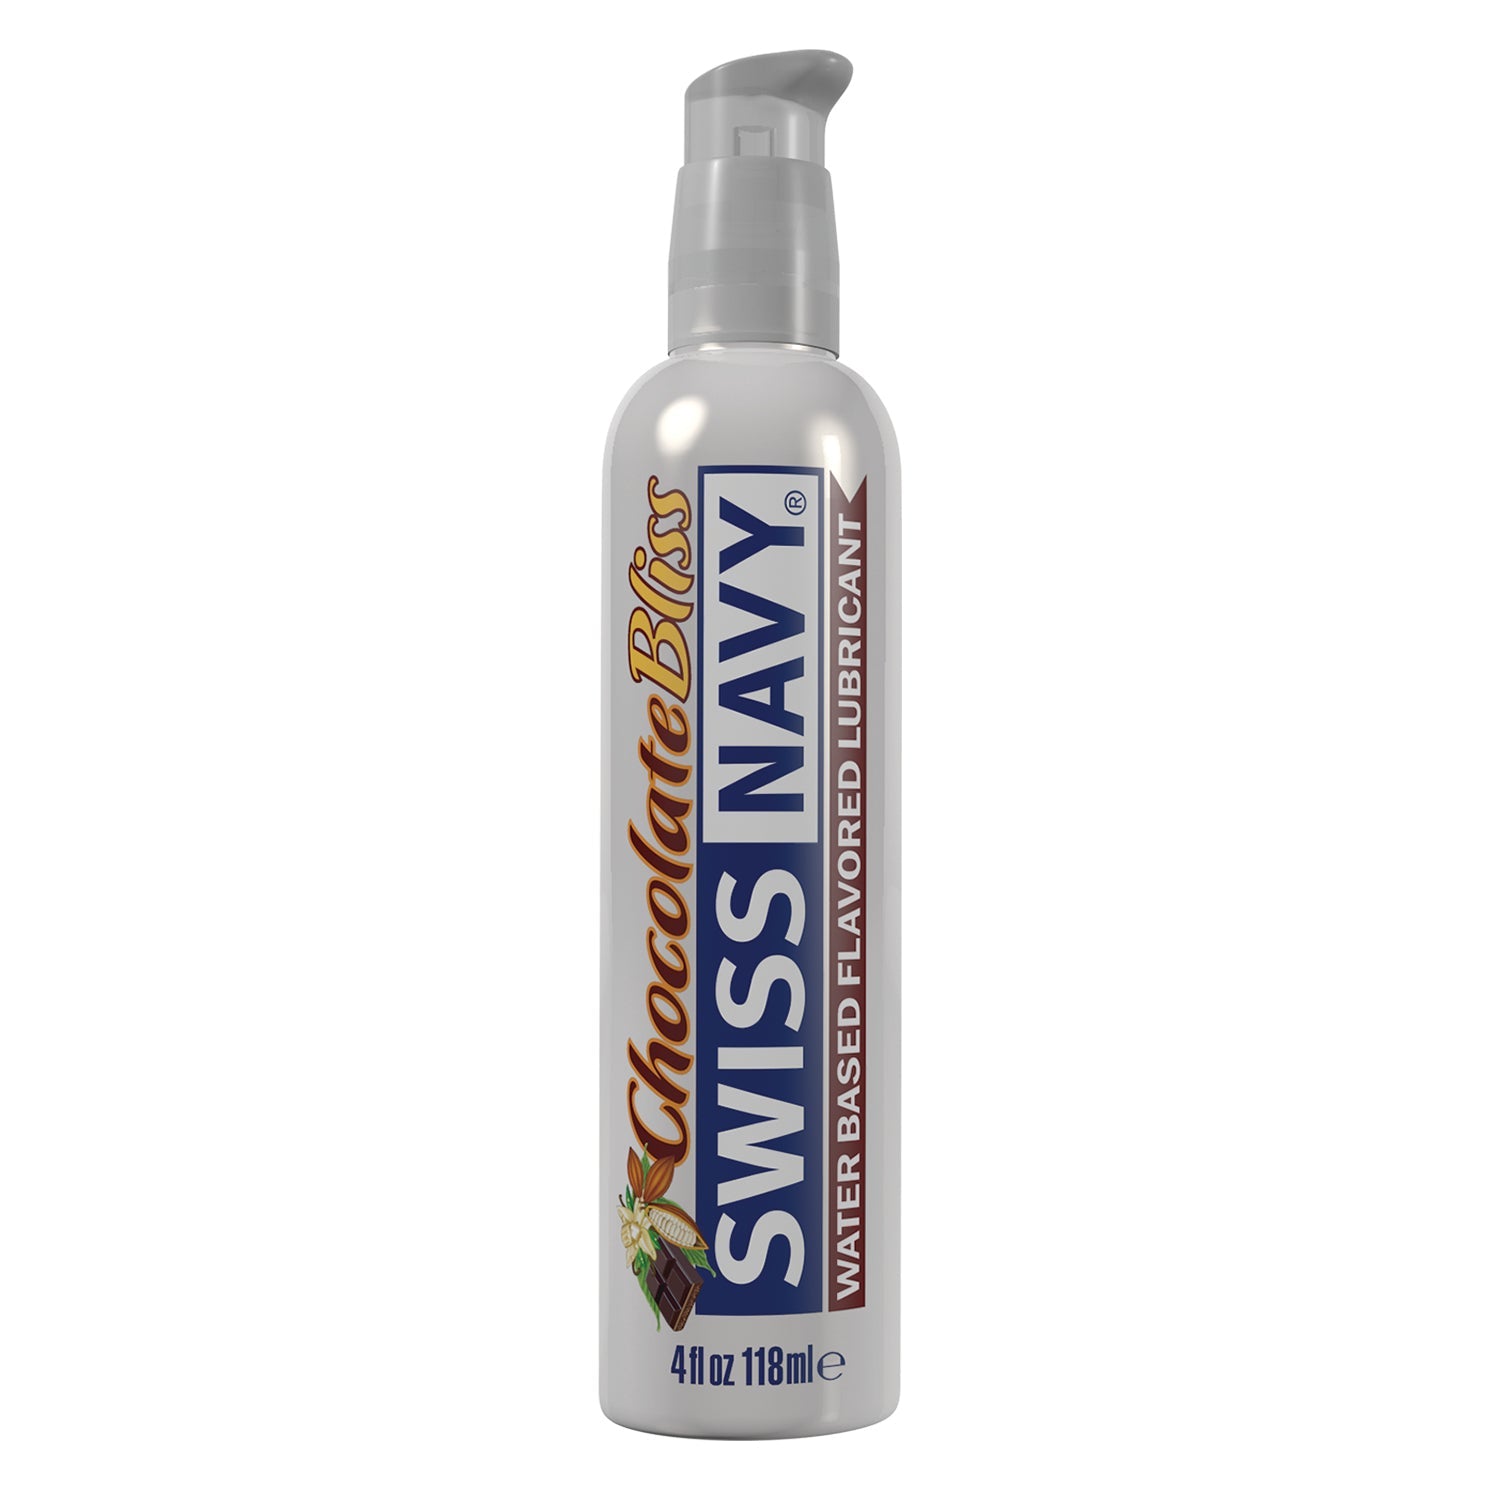 Swiss Navy Flavored, Water-based Lubricants